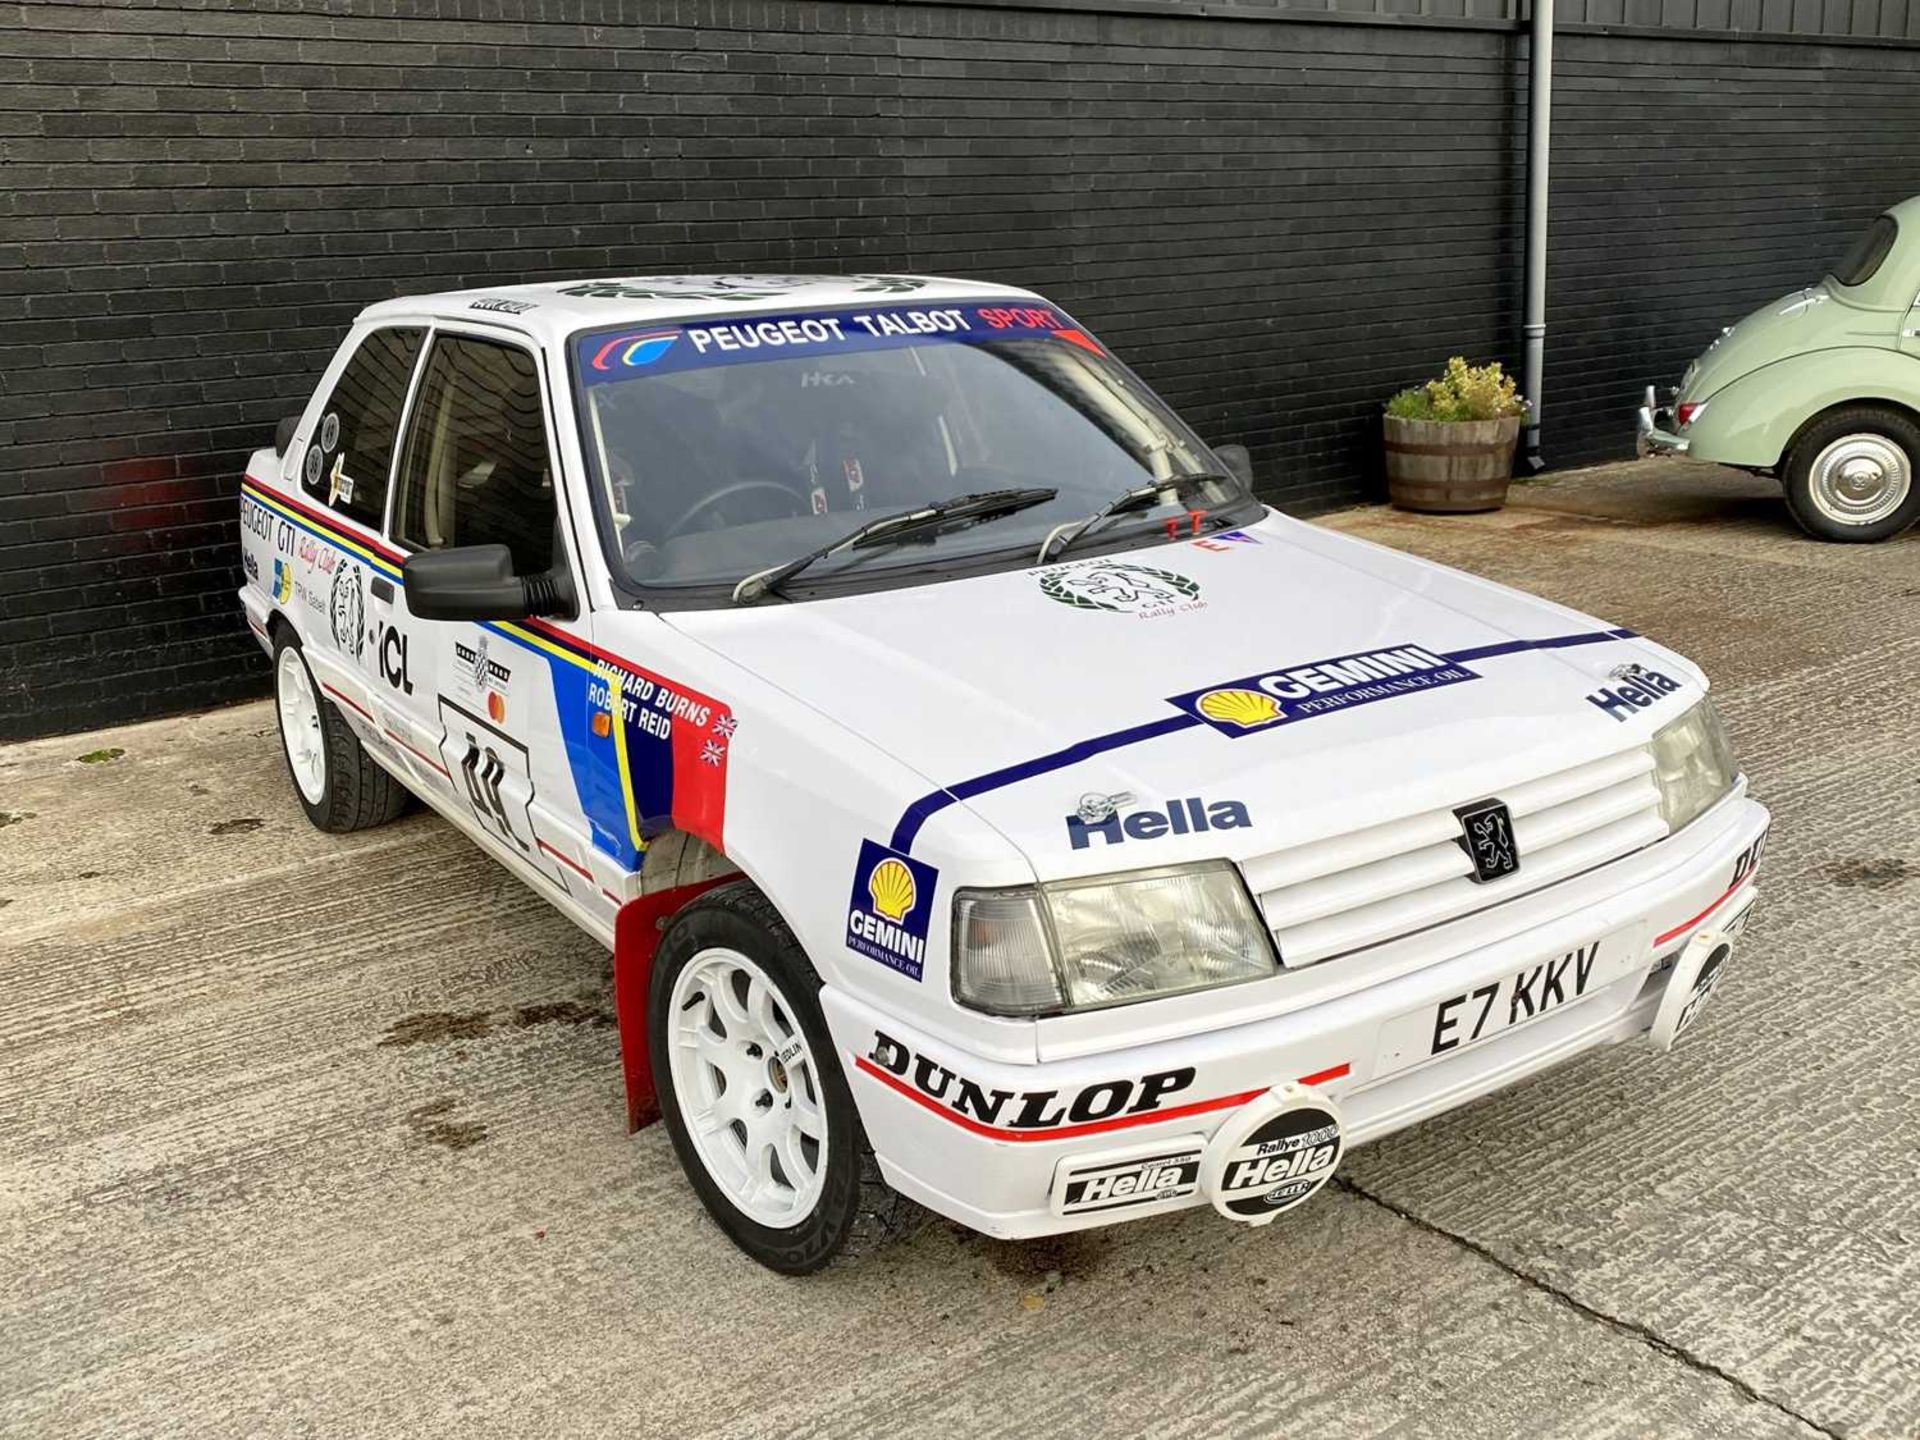 1987 Peugeot 309 GTi Group N Rally Car FIA paperwork and a previous entrant at the Goodwood Festival - Image 3 of 50